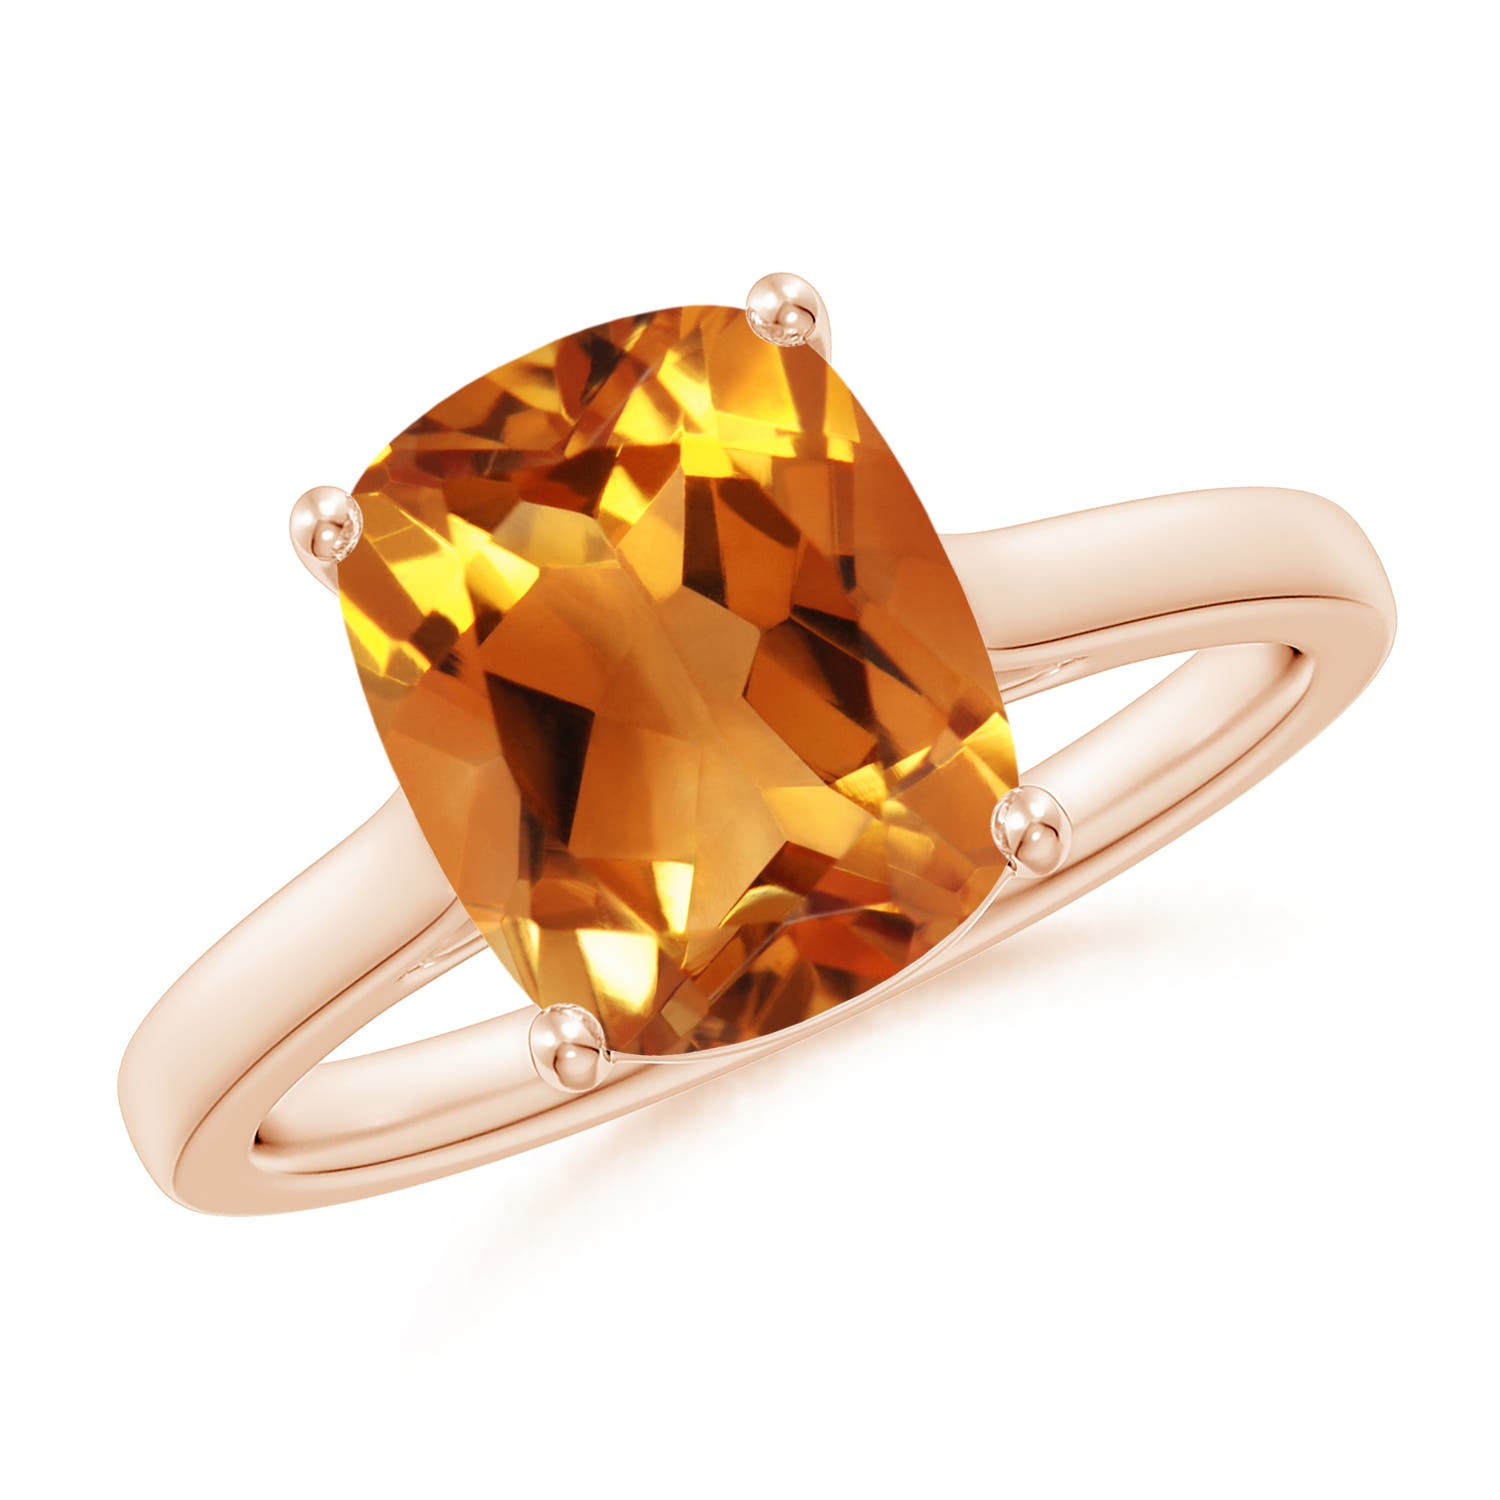 AAA - Citrine / 2.67 CT / 14 KT Rose Gold